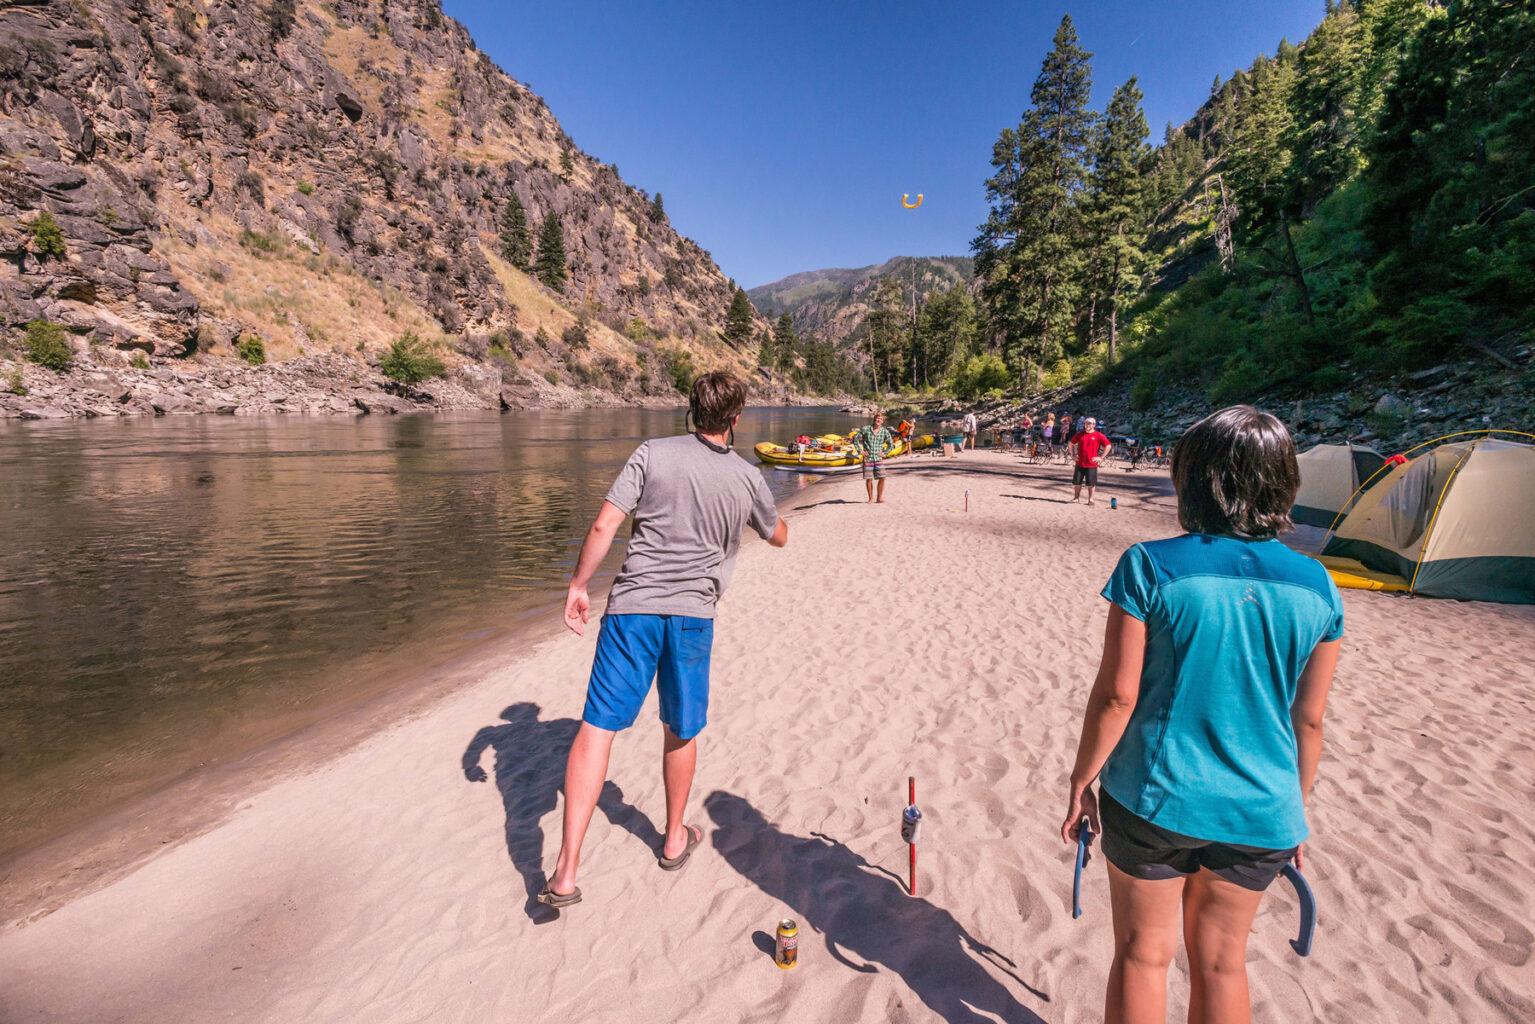 Four people playing horseshoes on a sandy beach along the Main Salmon River in Idaho.